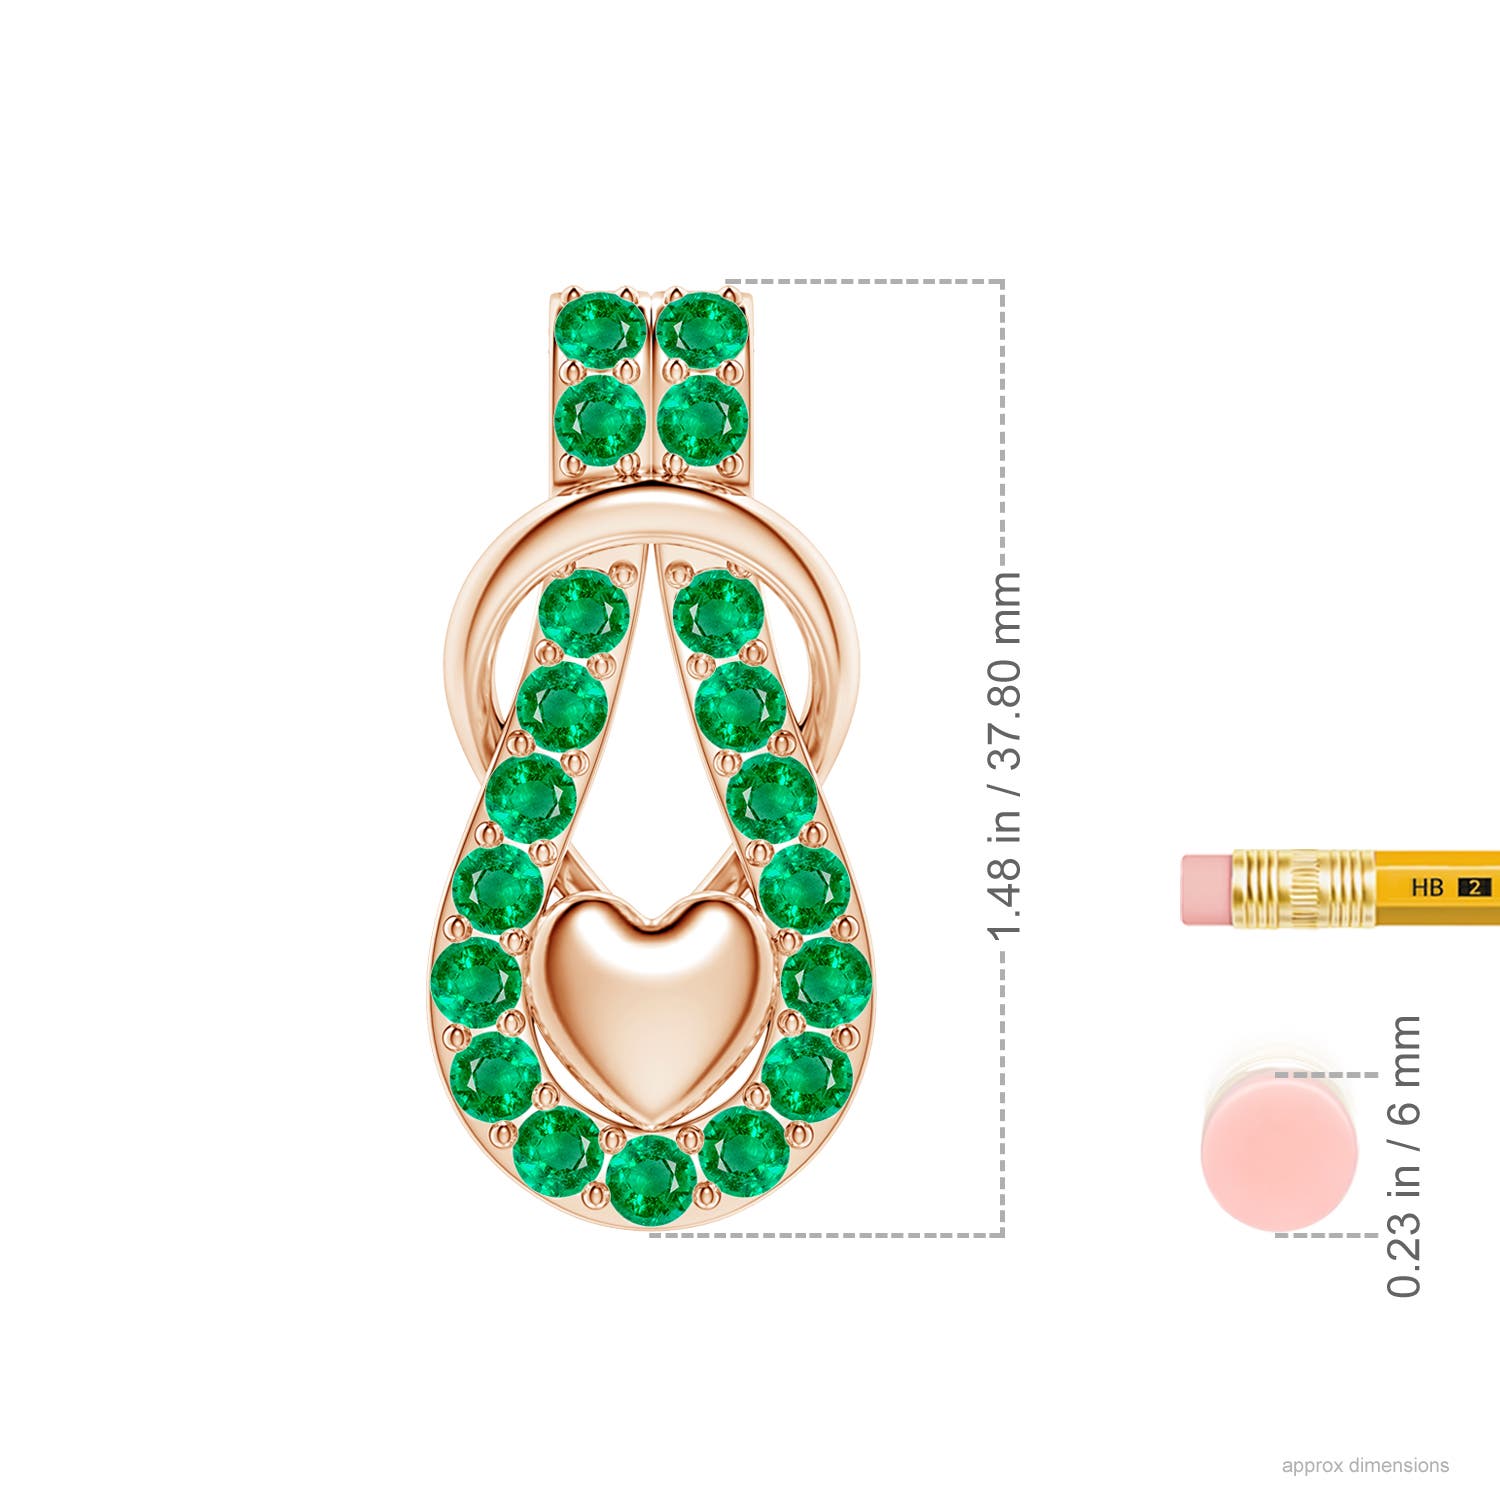 AAA - Emerald / 2.85 CT / 18 KT Rose Gold